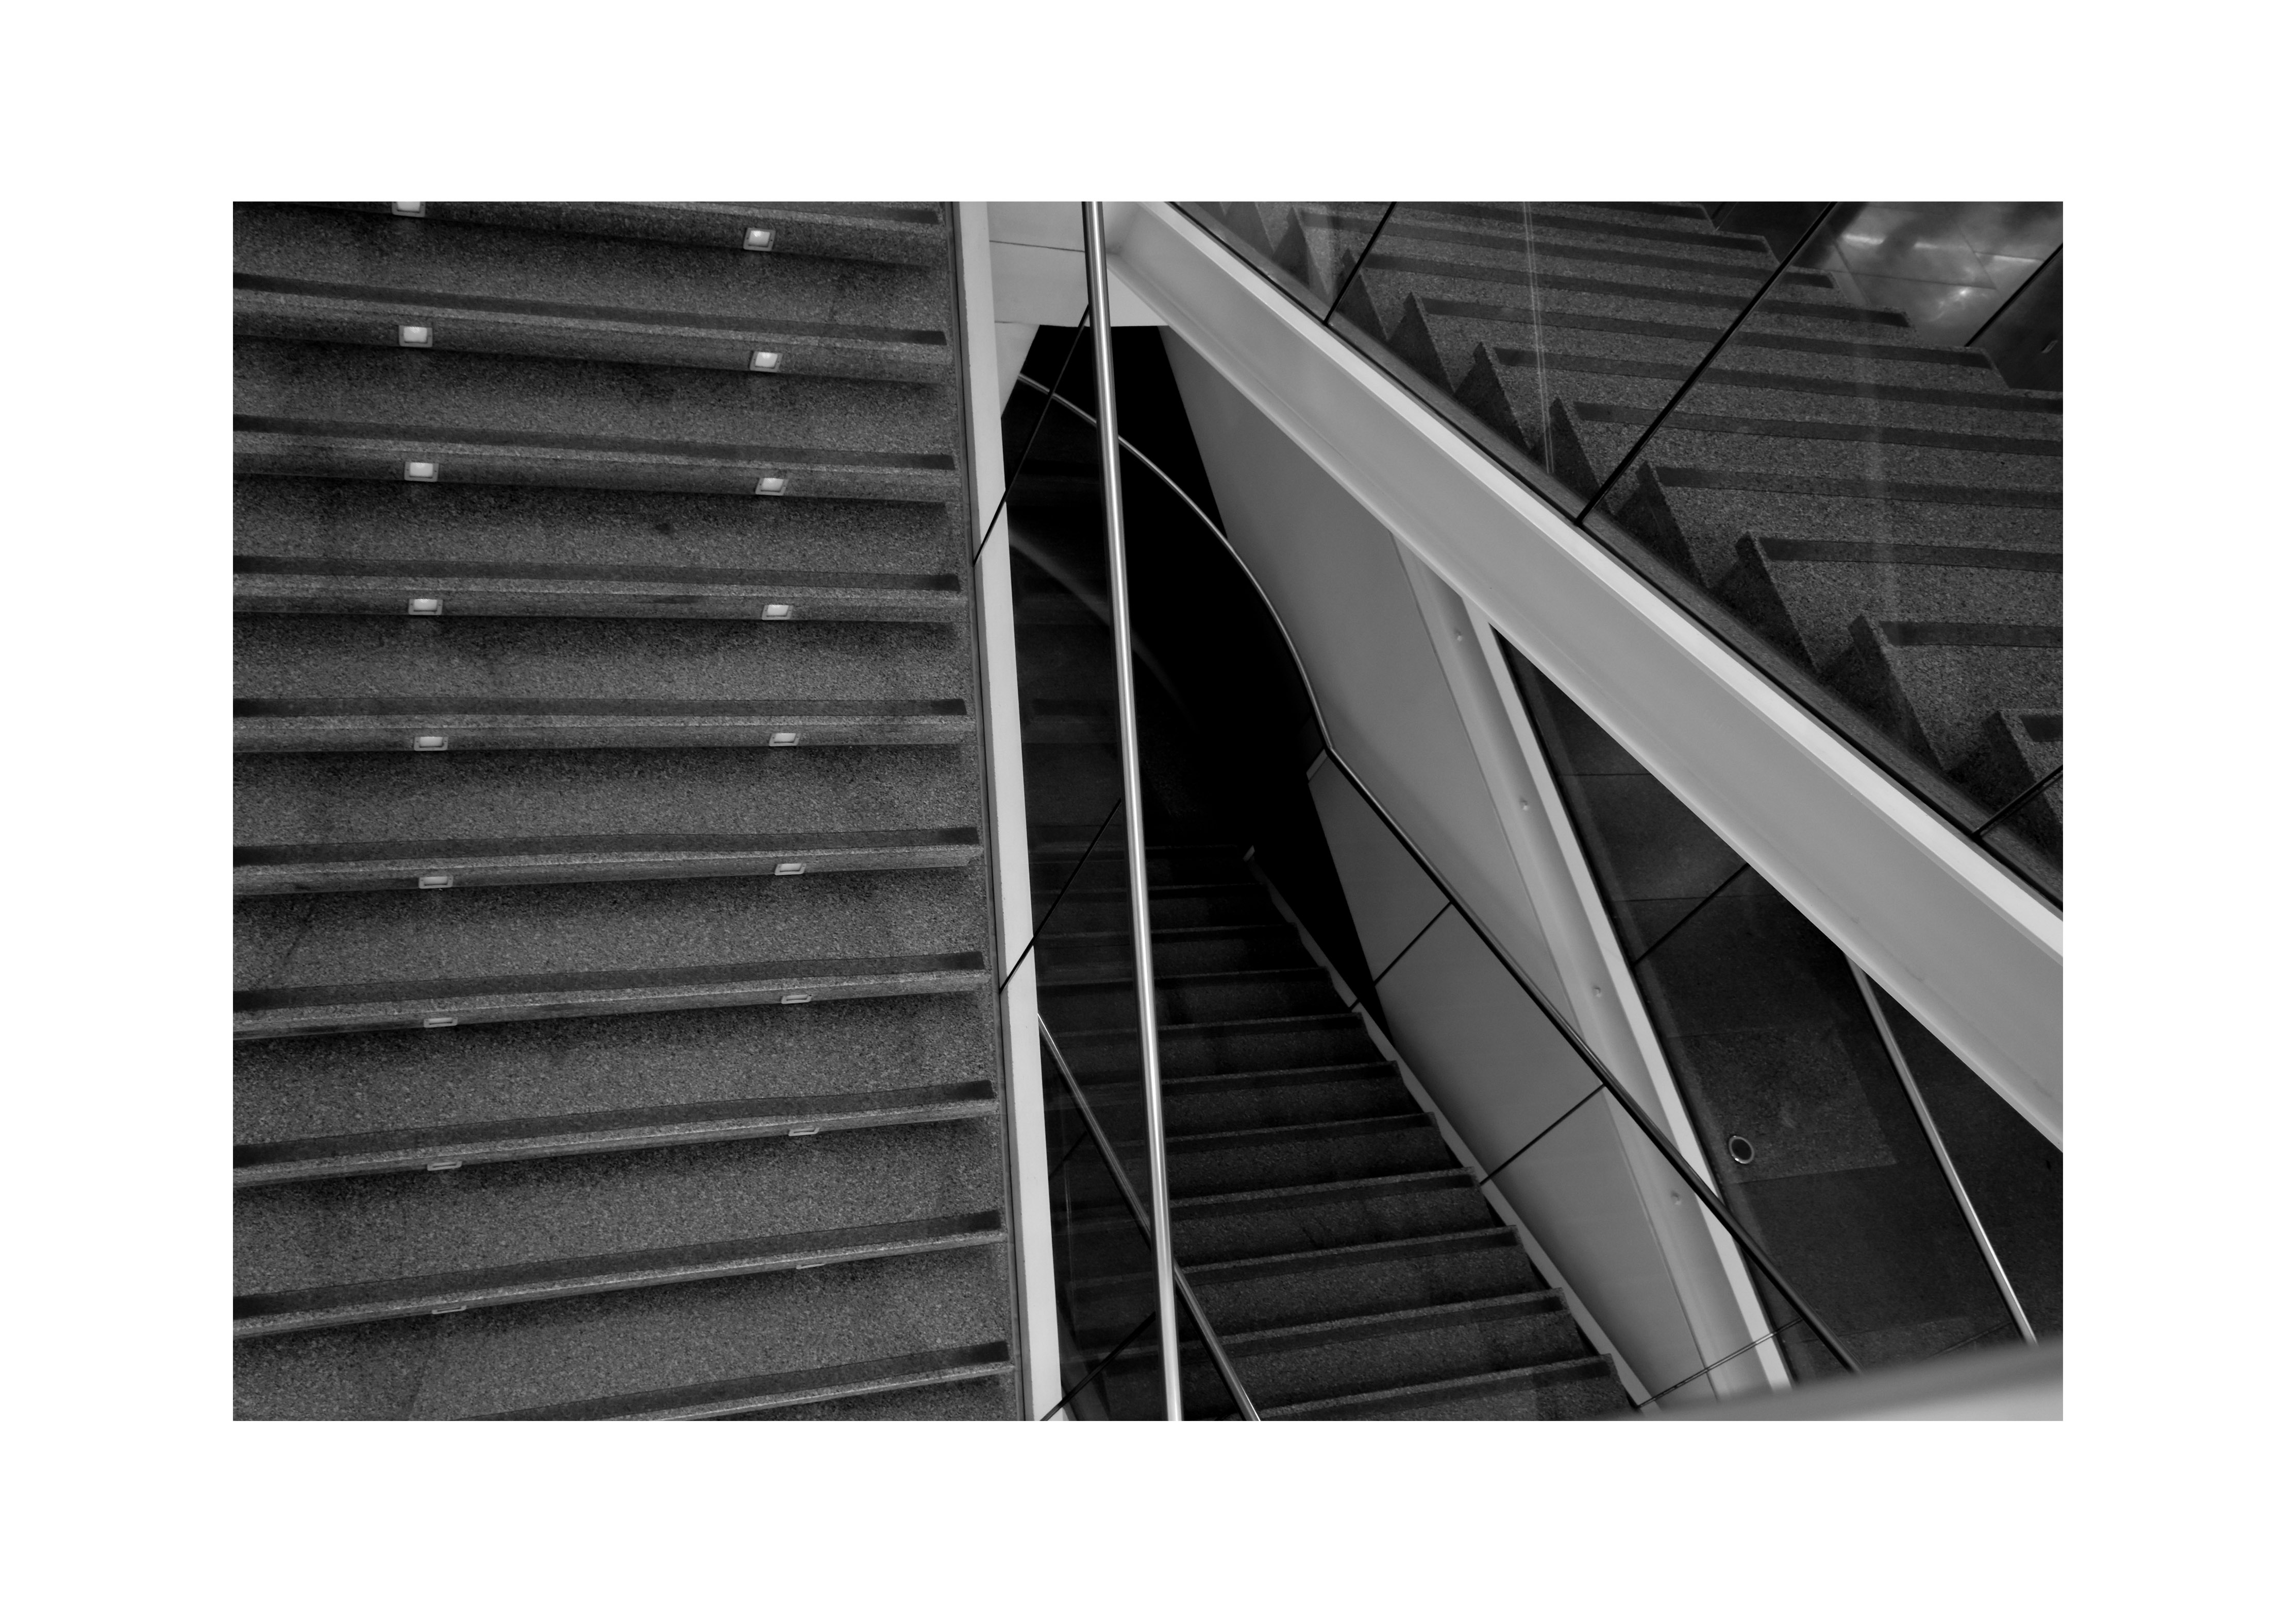 General 4455x3150 architecture monochrome stairs